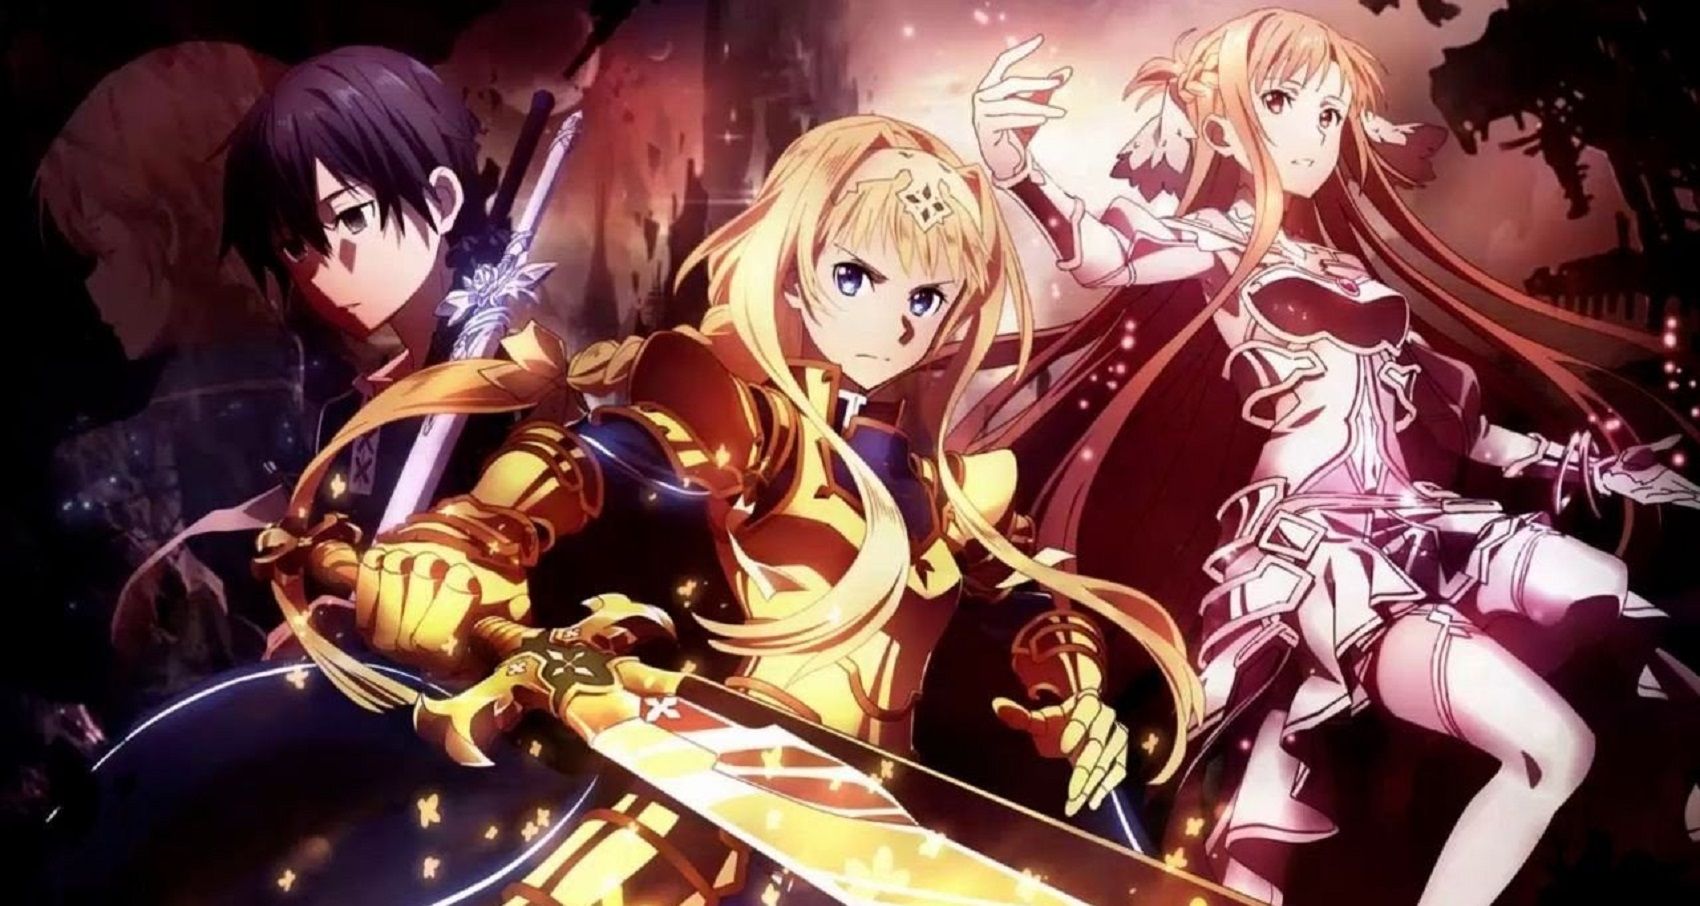 3 Most Anticipated Anime for Winter 2020